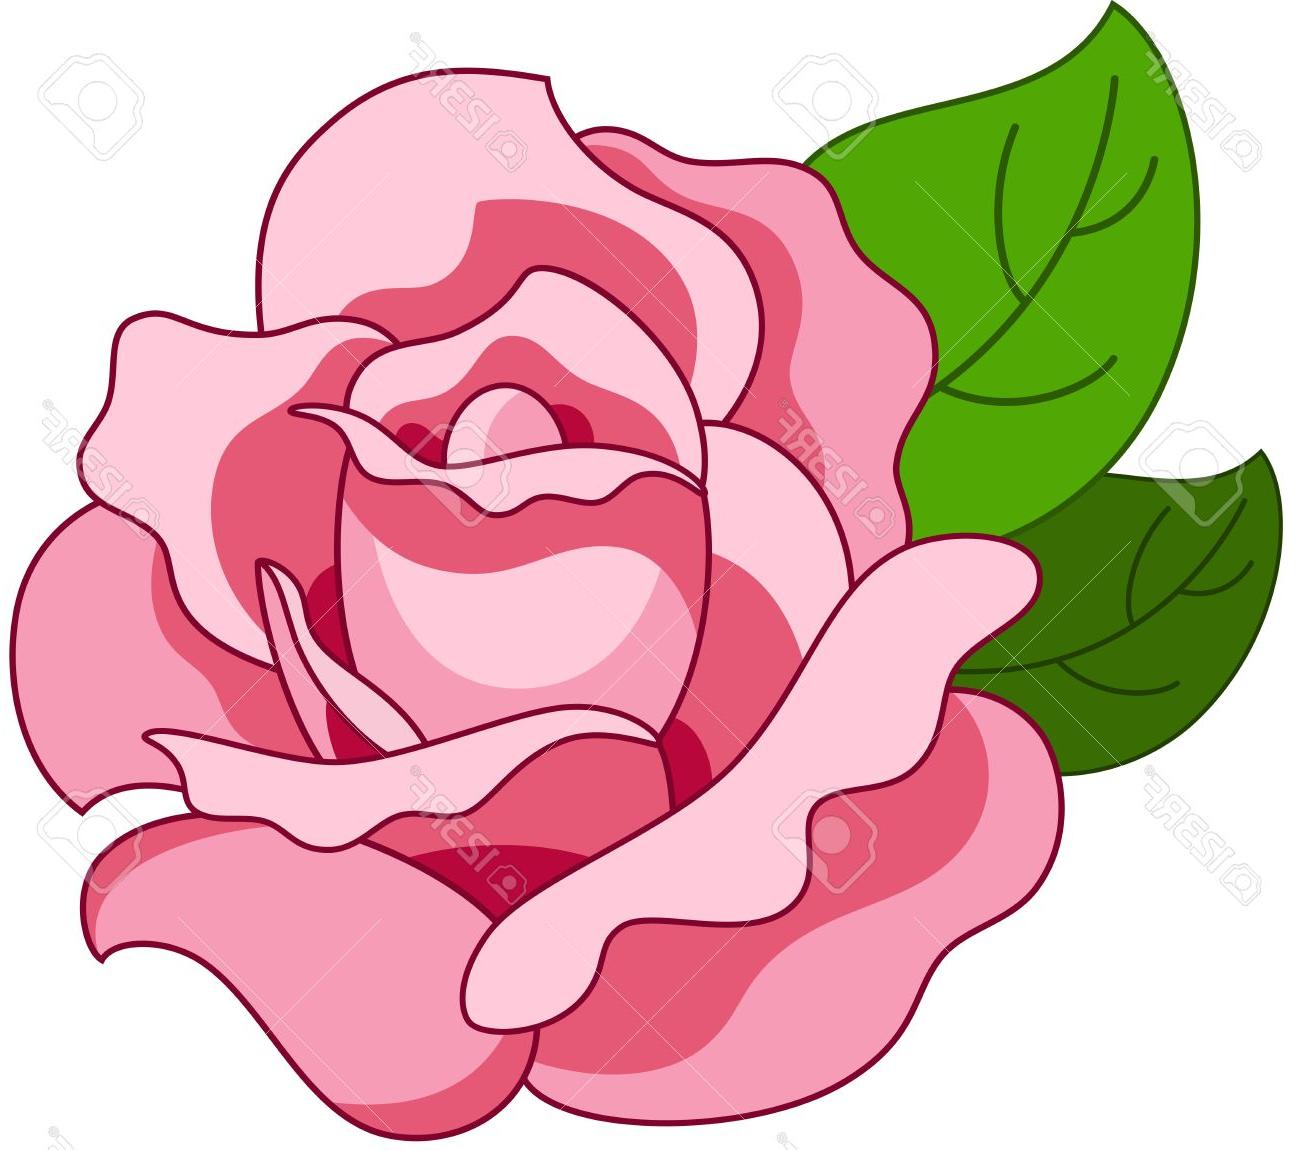 rose cartoon Beautiful illustration with pink rose flower isolated stock vector jpg